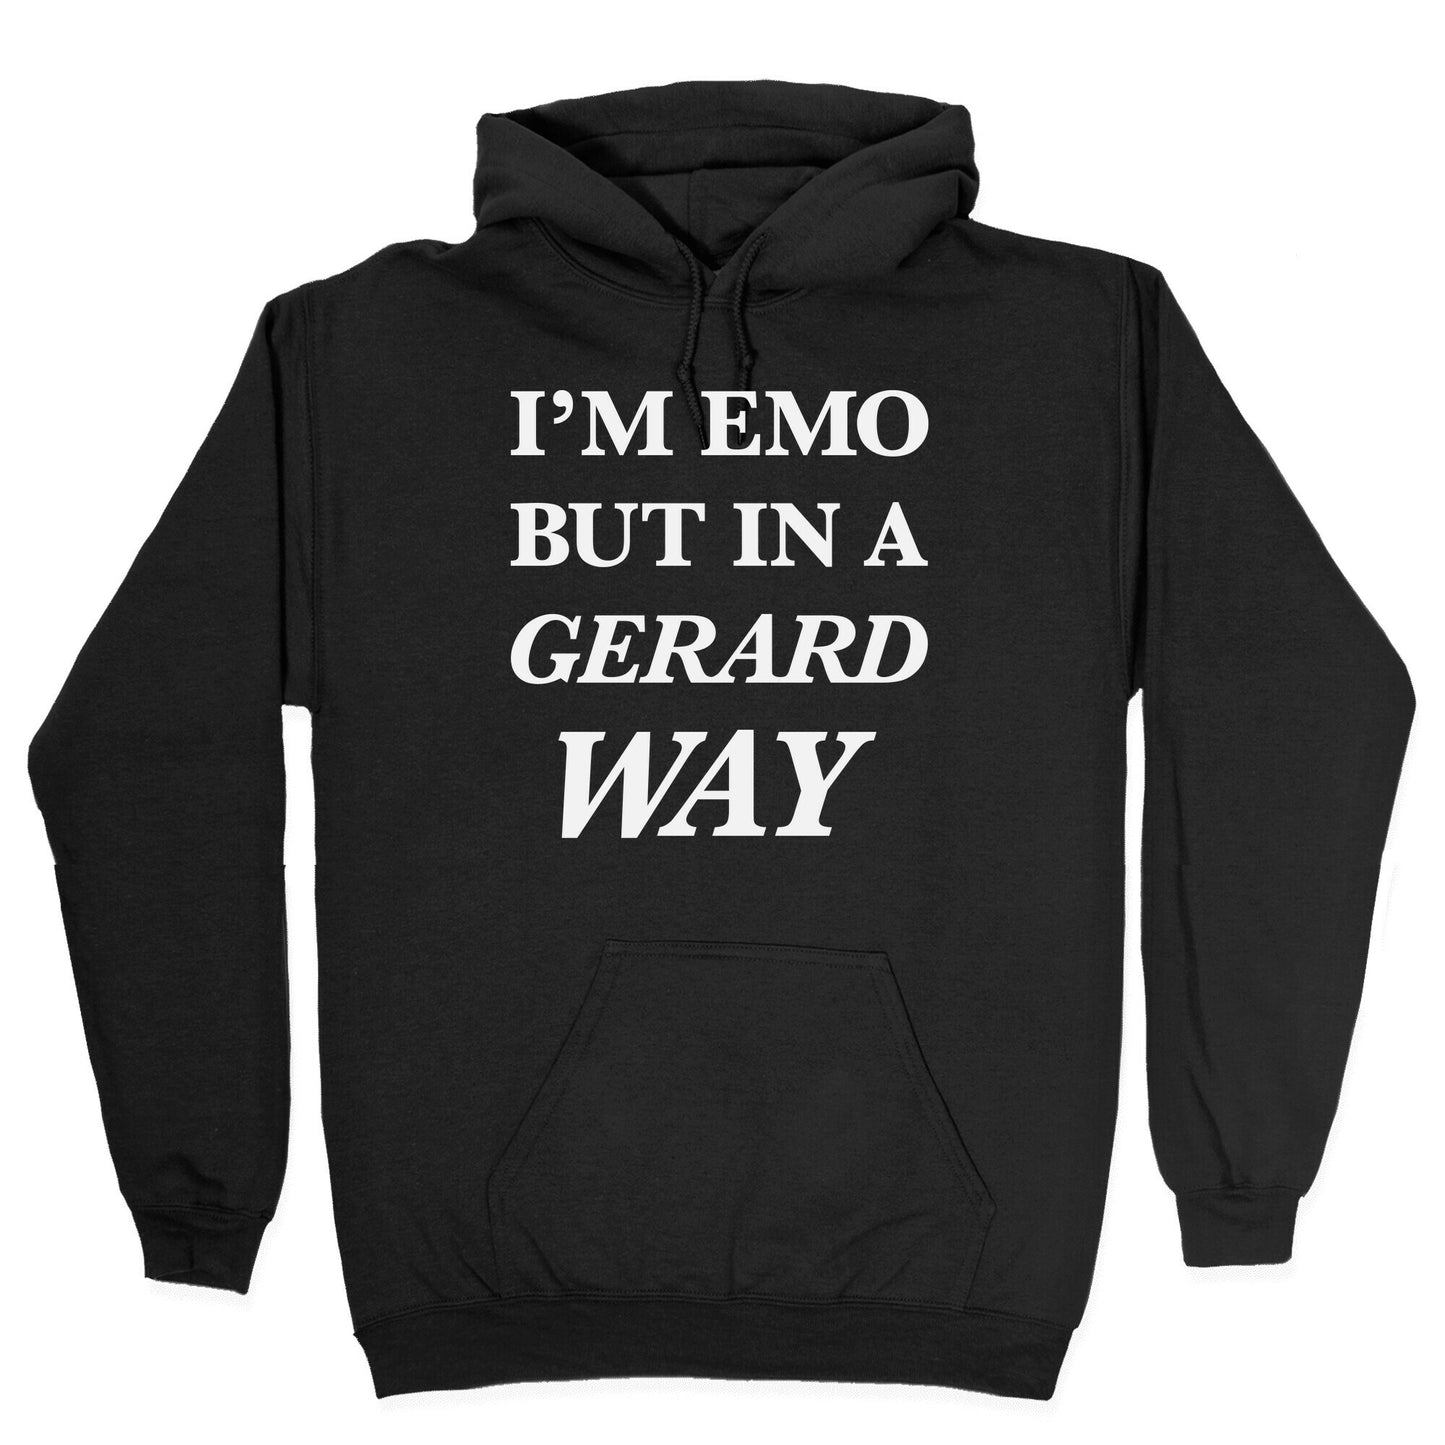 I'm Emo, But in a Gerard Way Hoodie